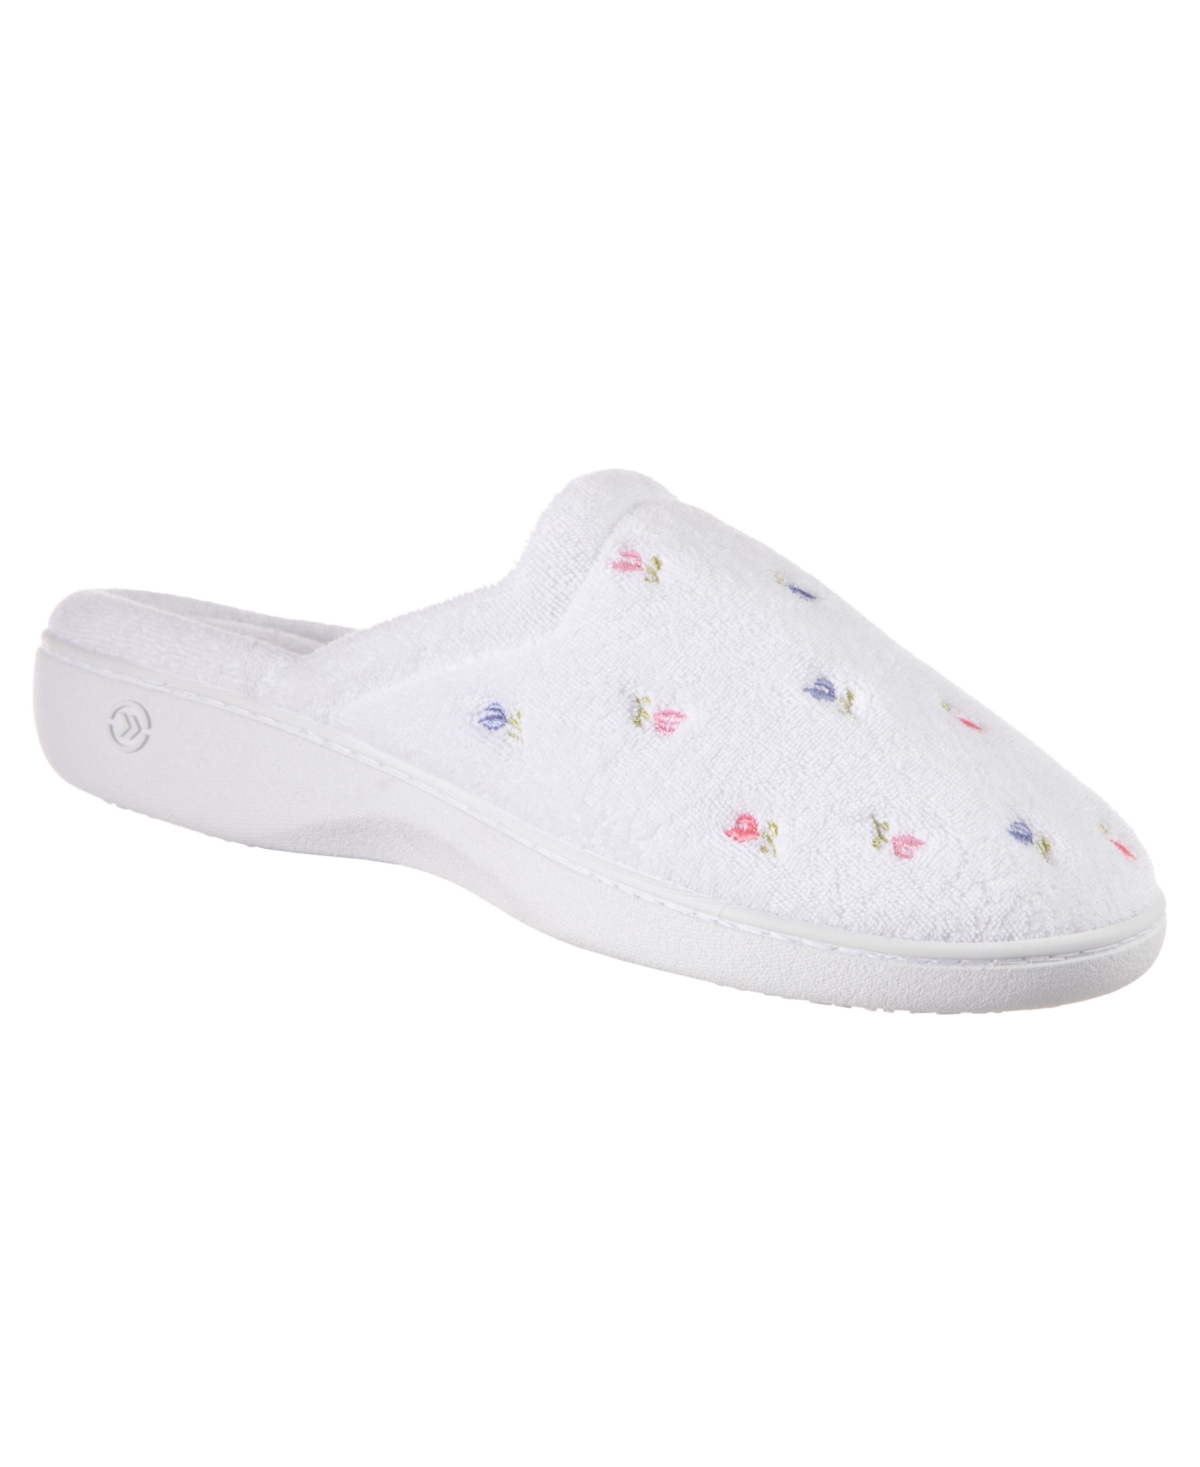 Women's Secret Sole Embroidered Clog Slippers - White